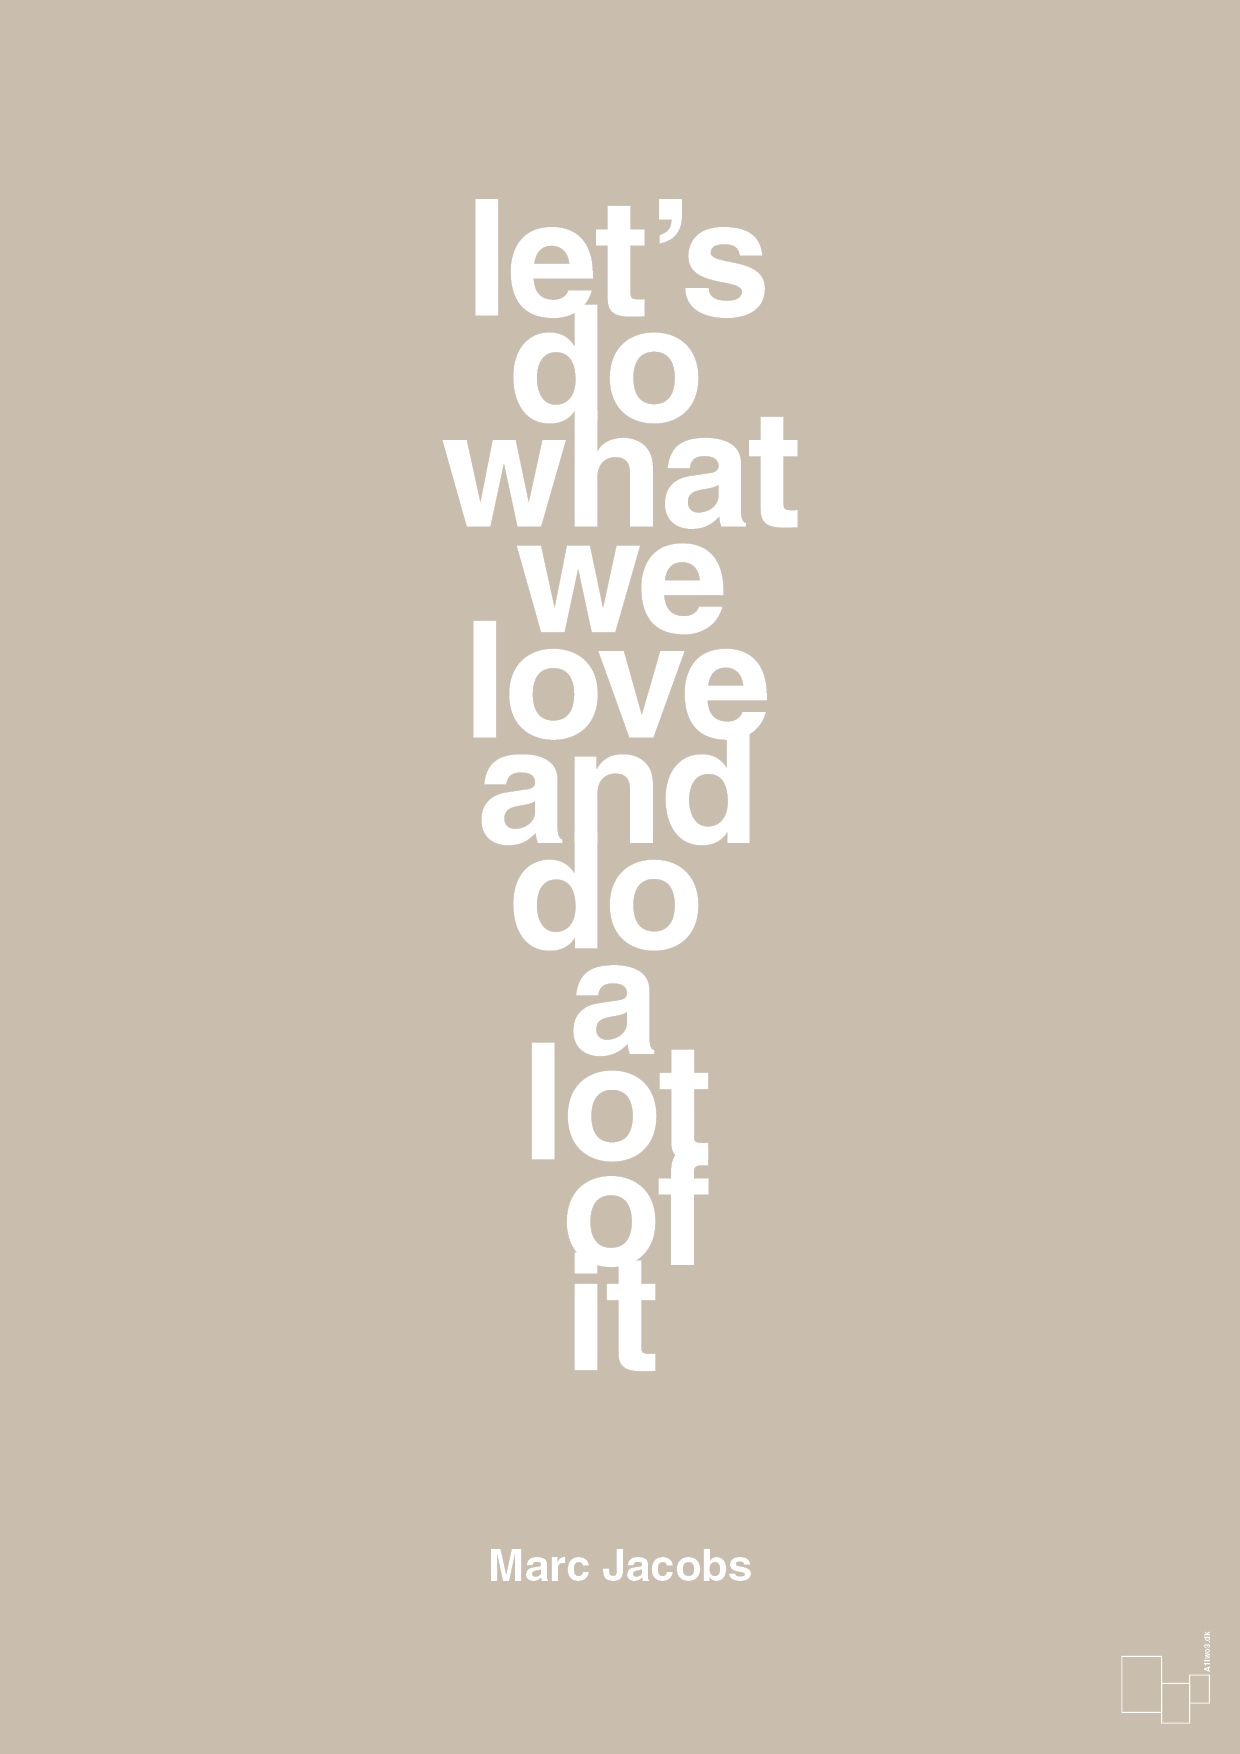 lets do what we love and do a lot of it - Plakat med Citater i Creamy Mushroom